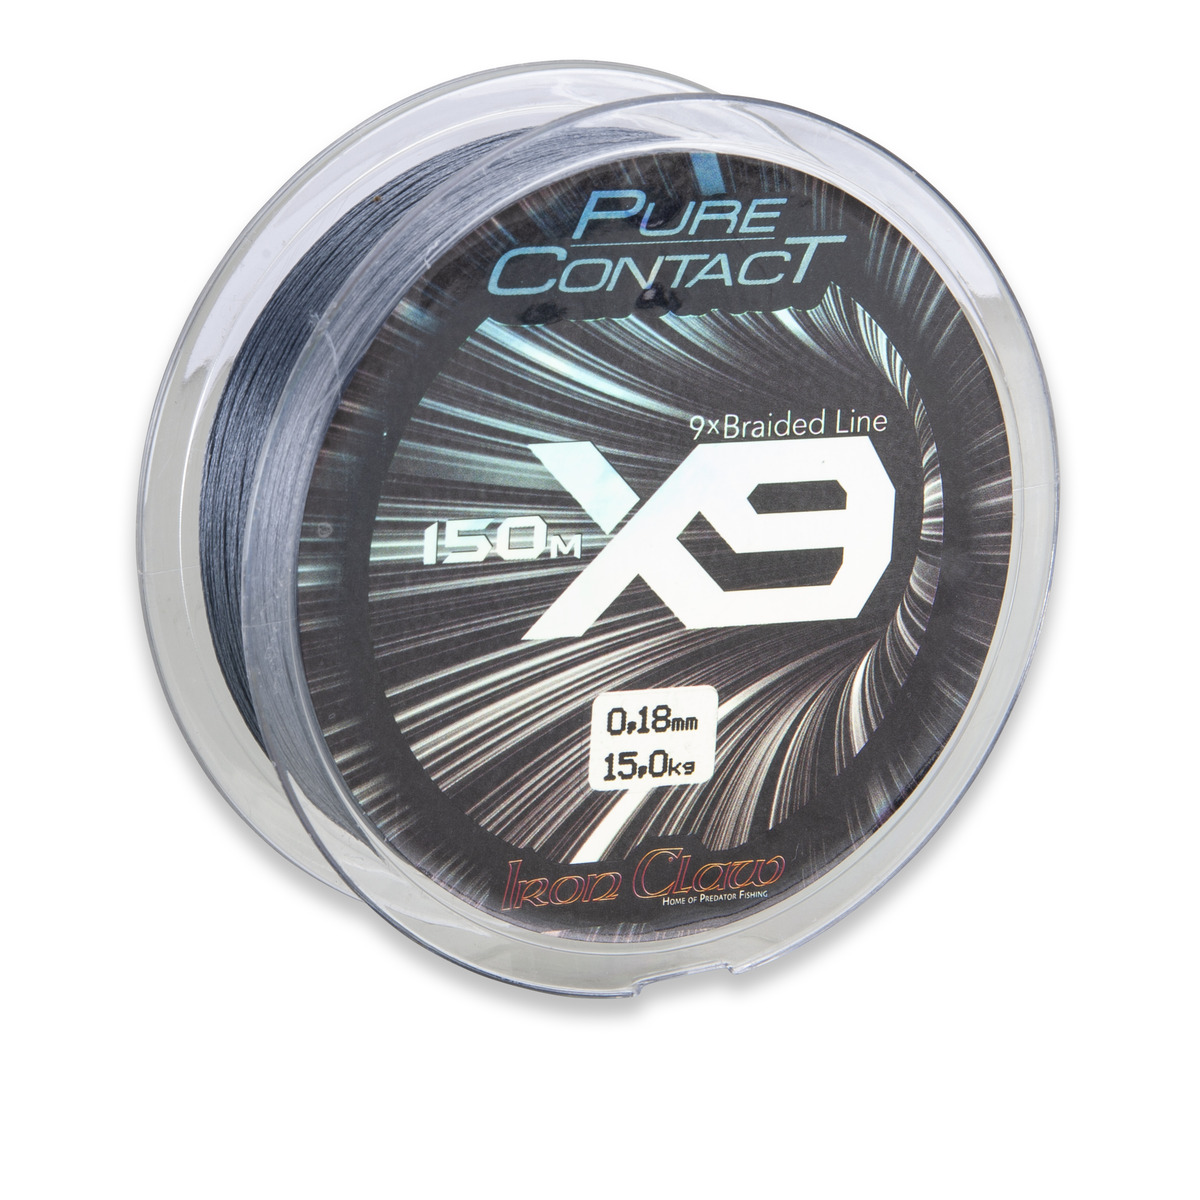 Iron Claw Pure Contact X9 Grey - 1500 m 0.18 mm